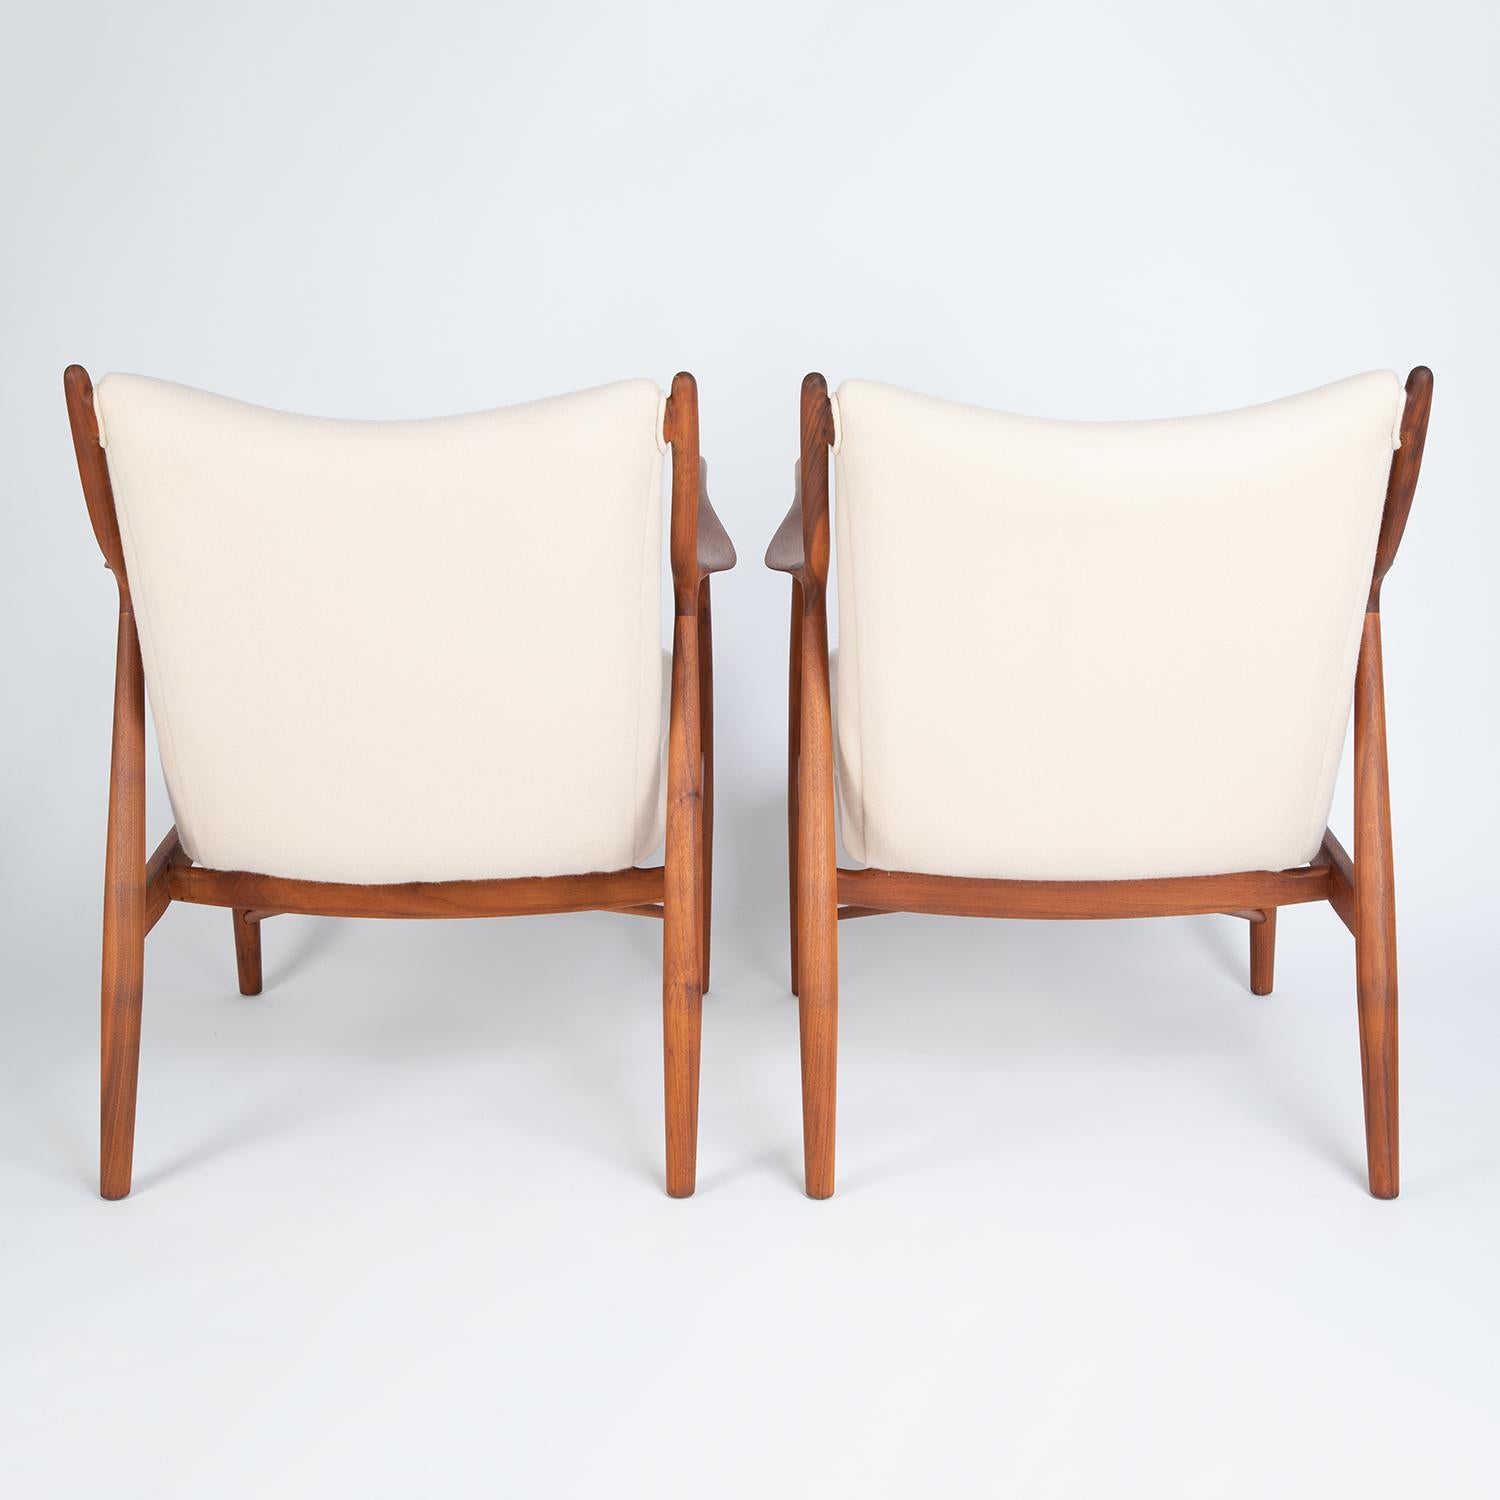 Hand-Crafted Finn Juhl Pair of Iconic 